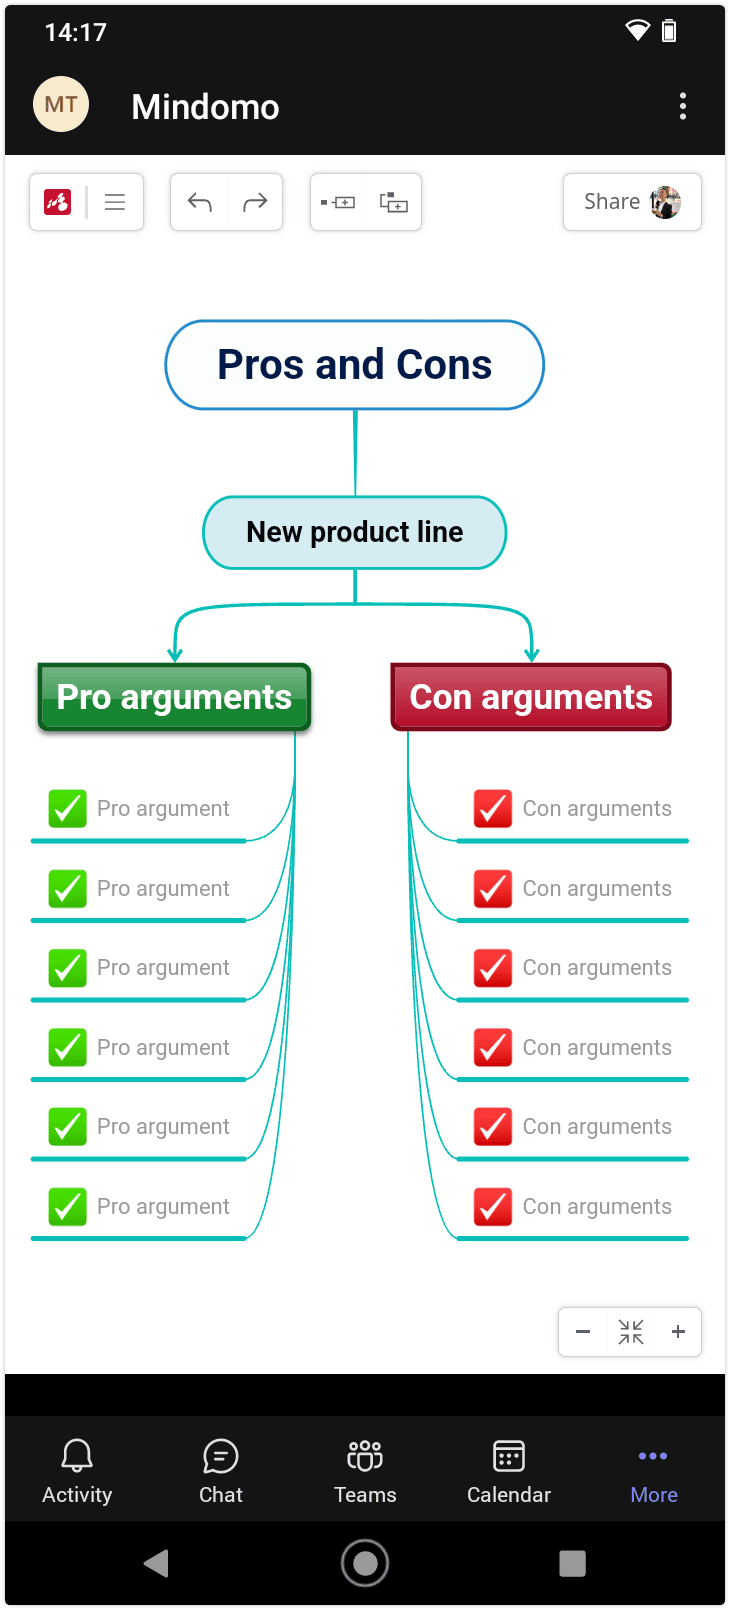 Mindomo mobile - Pros and cons mind map template